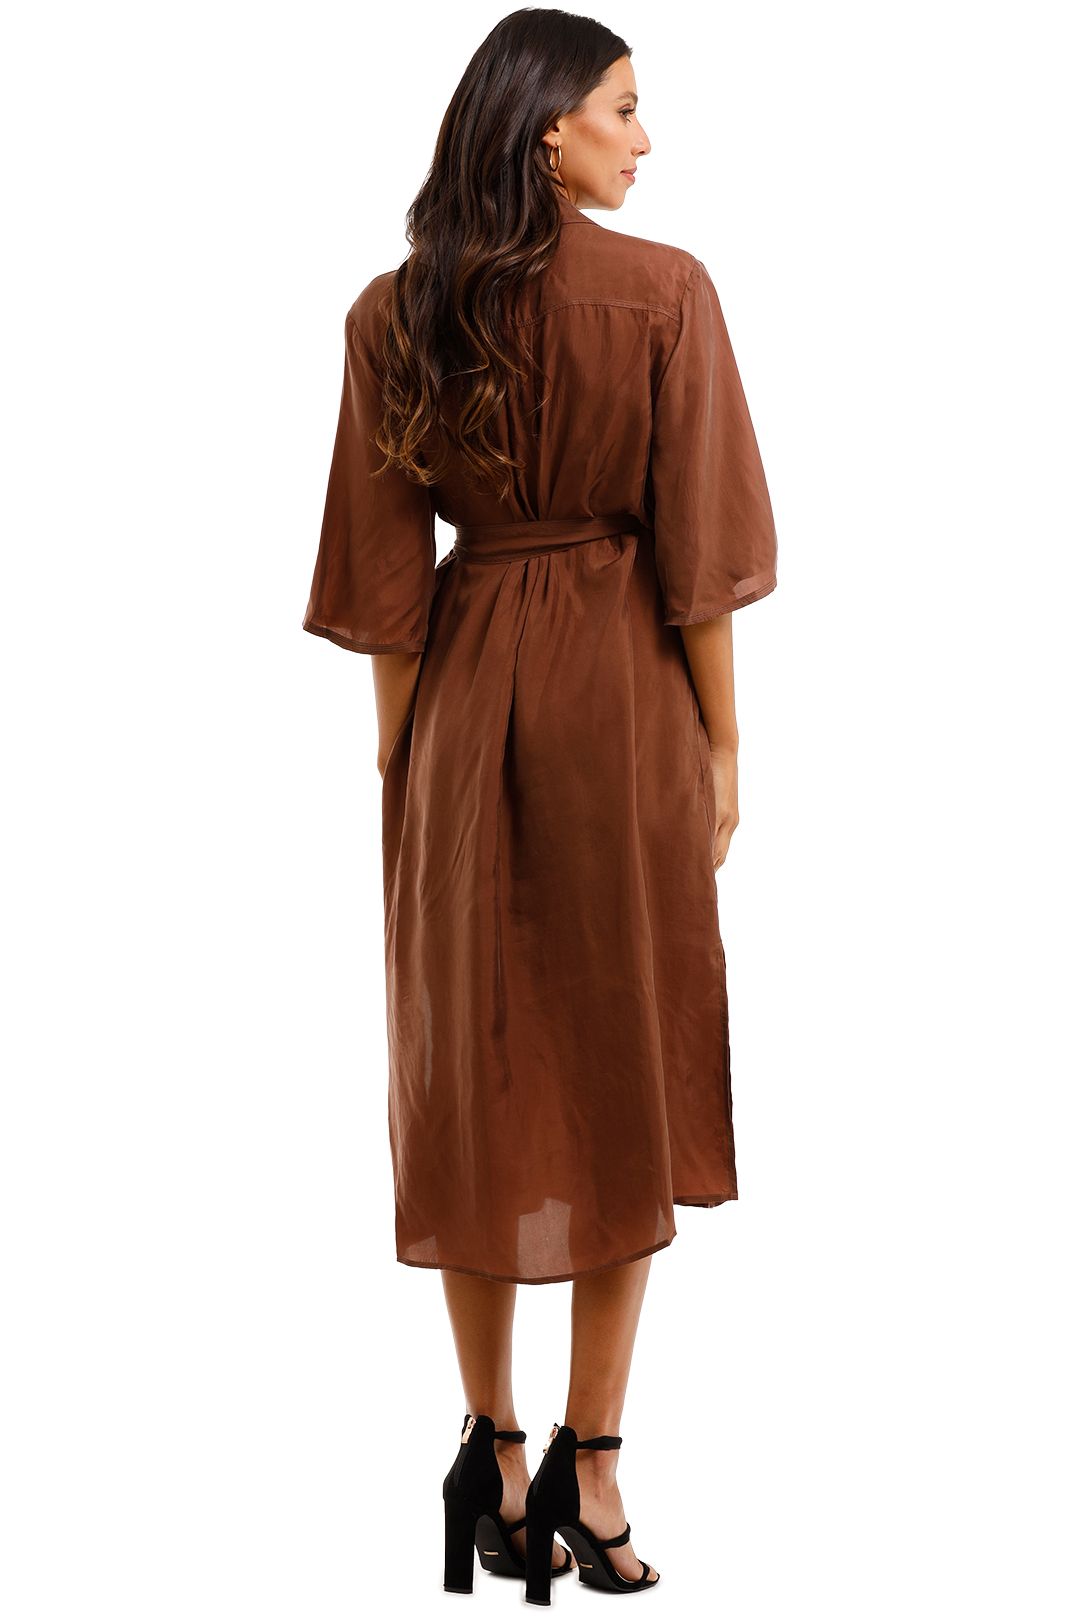 MNG Belted Cupro Dress Brown